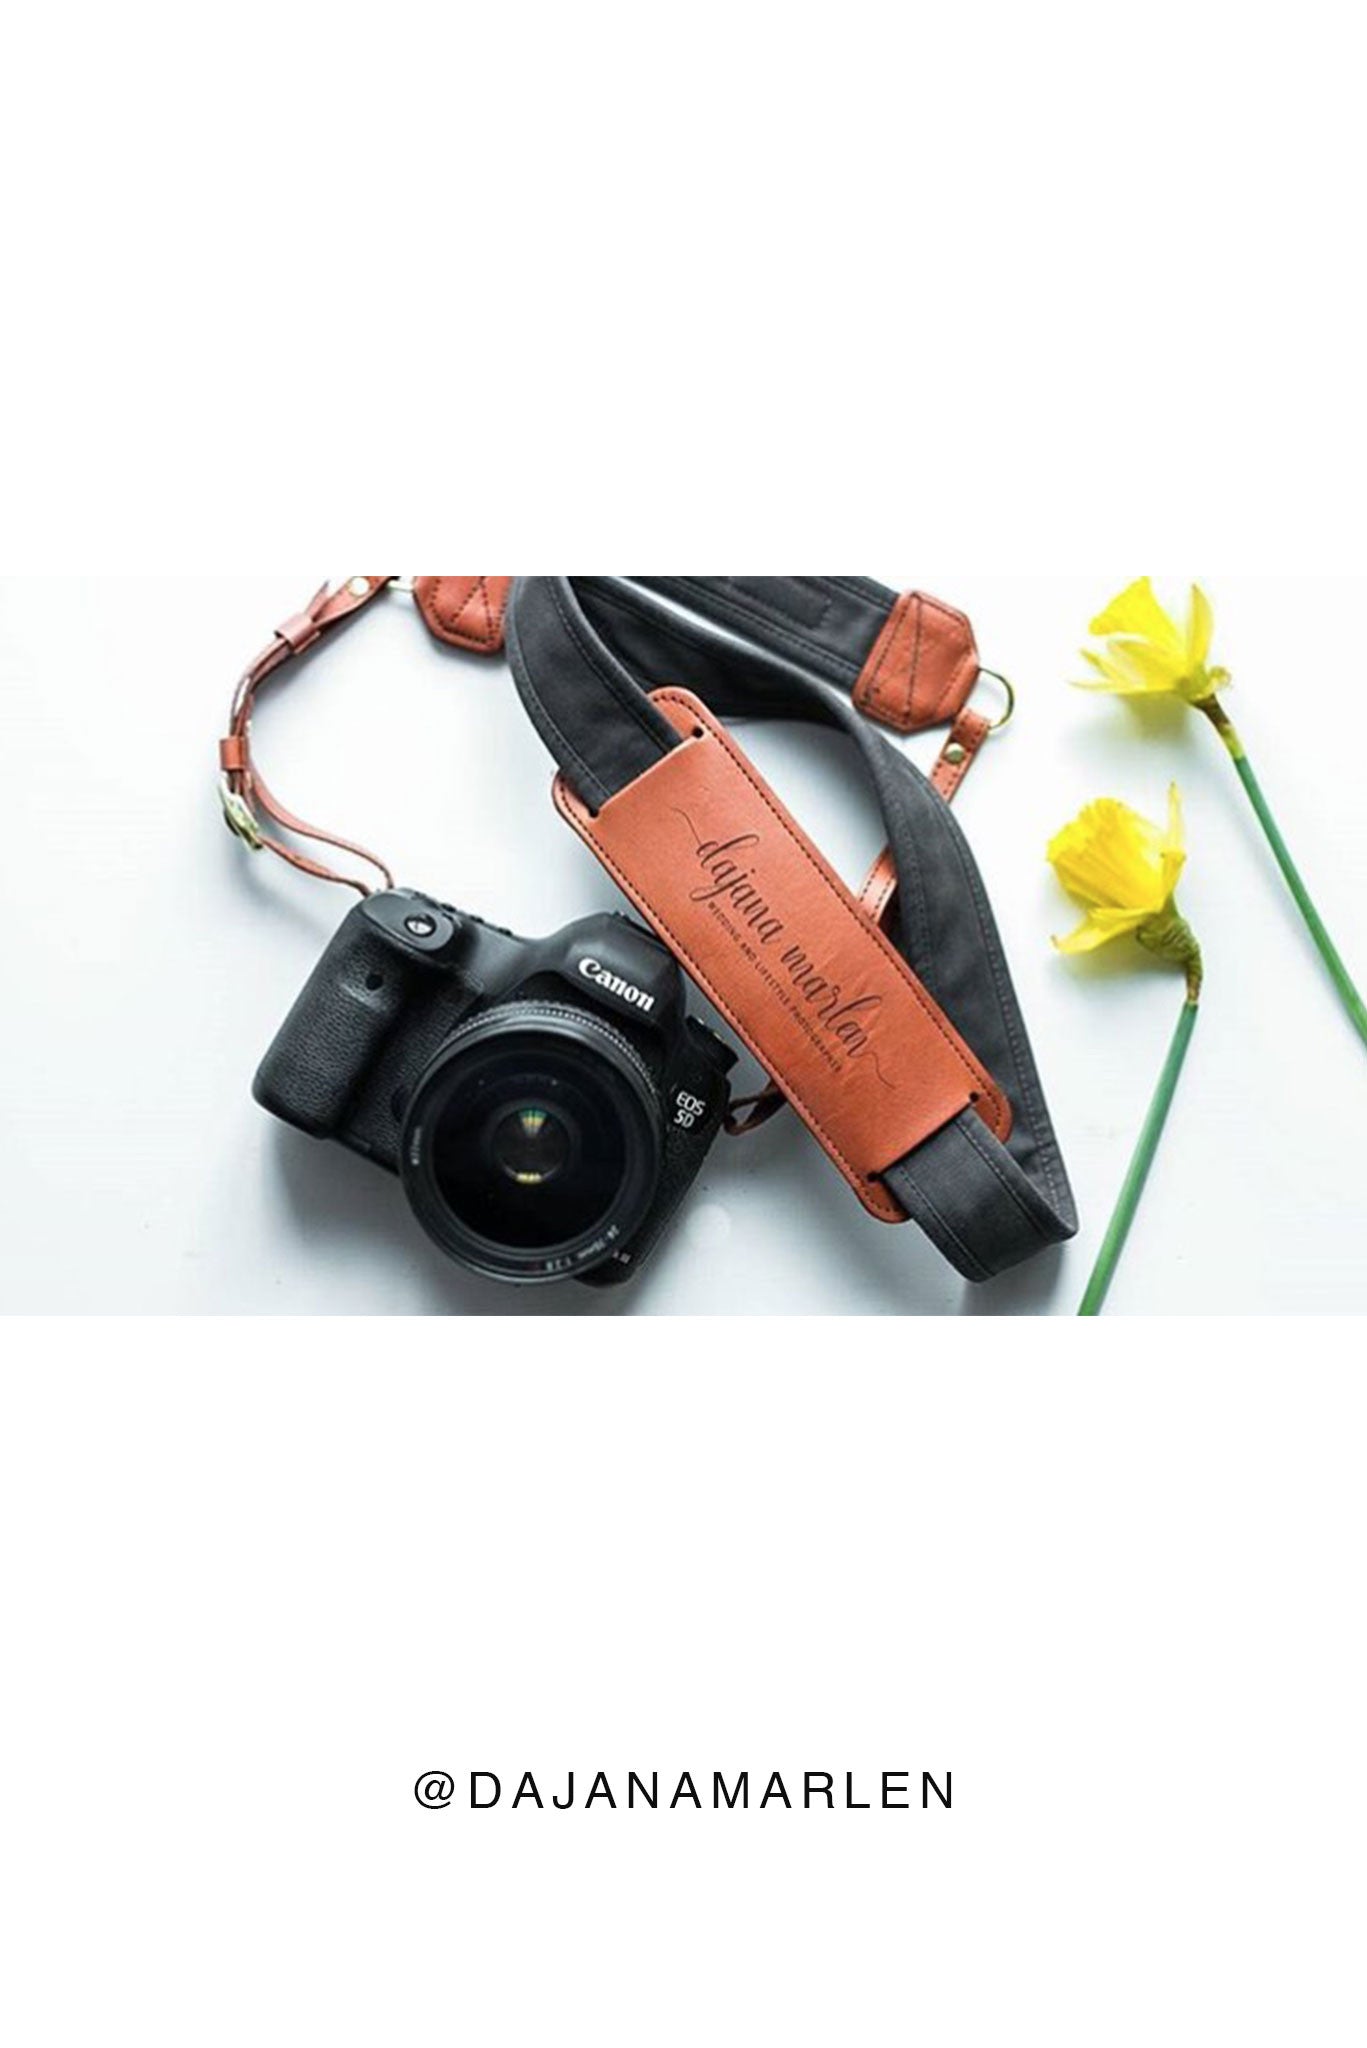 FOTO | Graphite Fotostrap - a charcoal gray canvas and genuine leather camera strap that can be personalized with a monogram or business logo, making it the perfect personalized gift! 